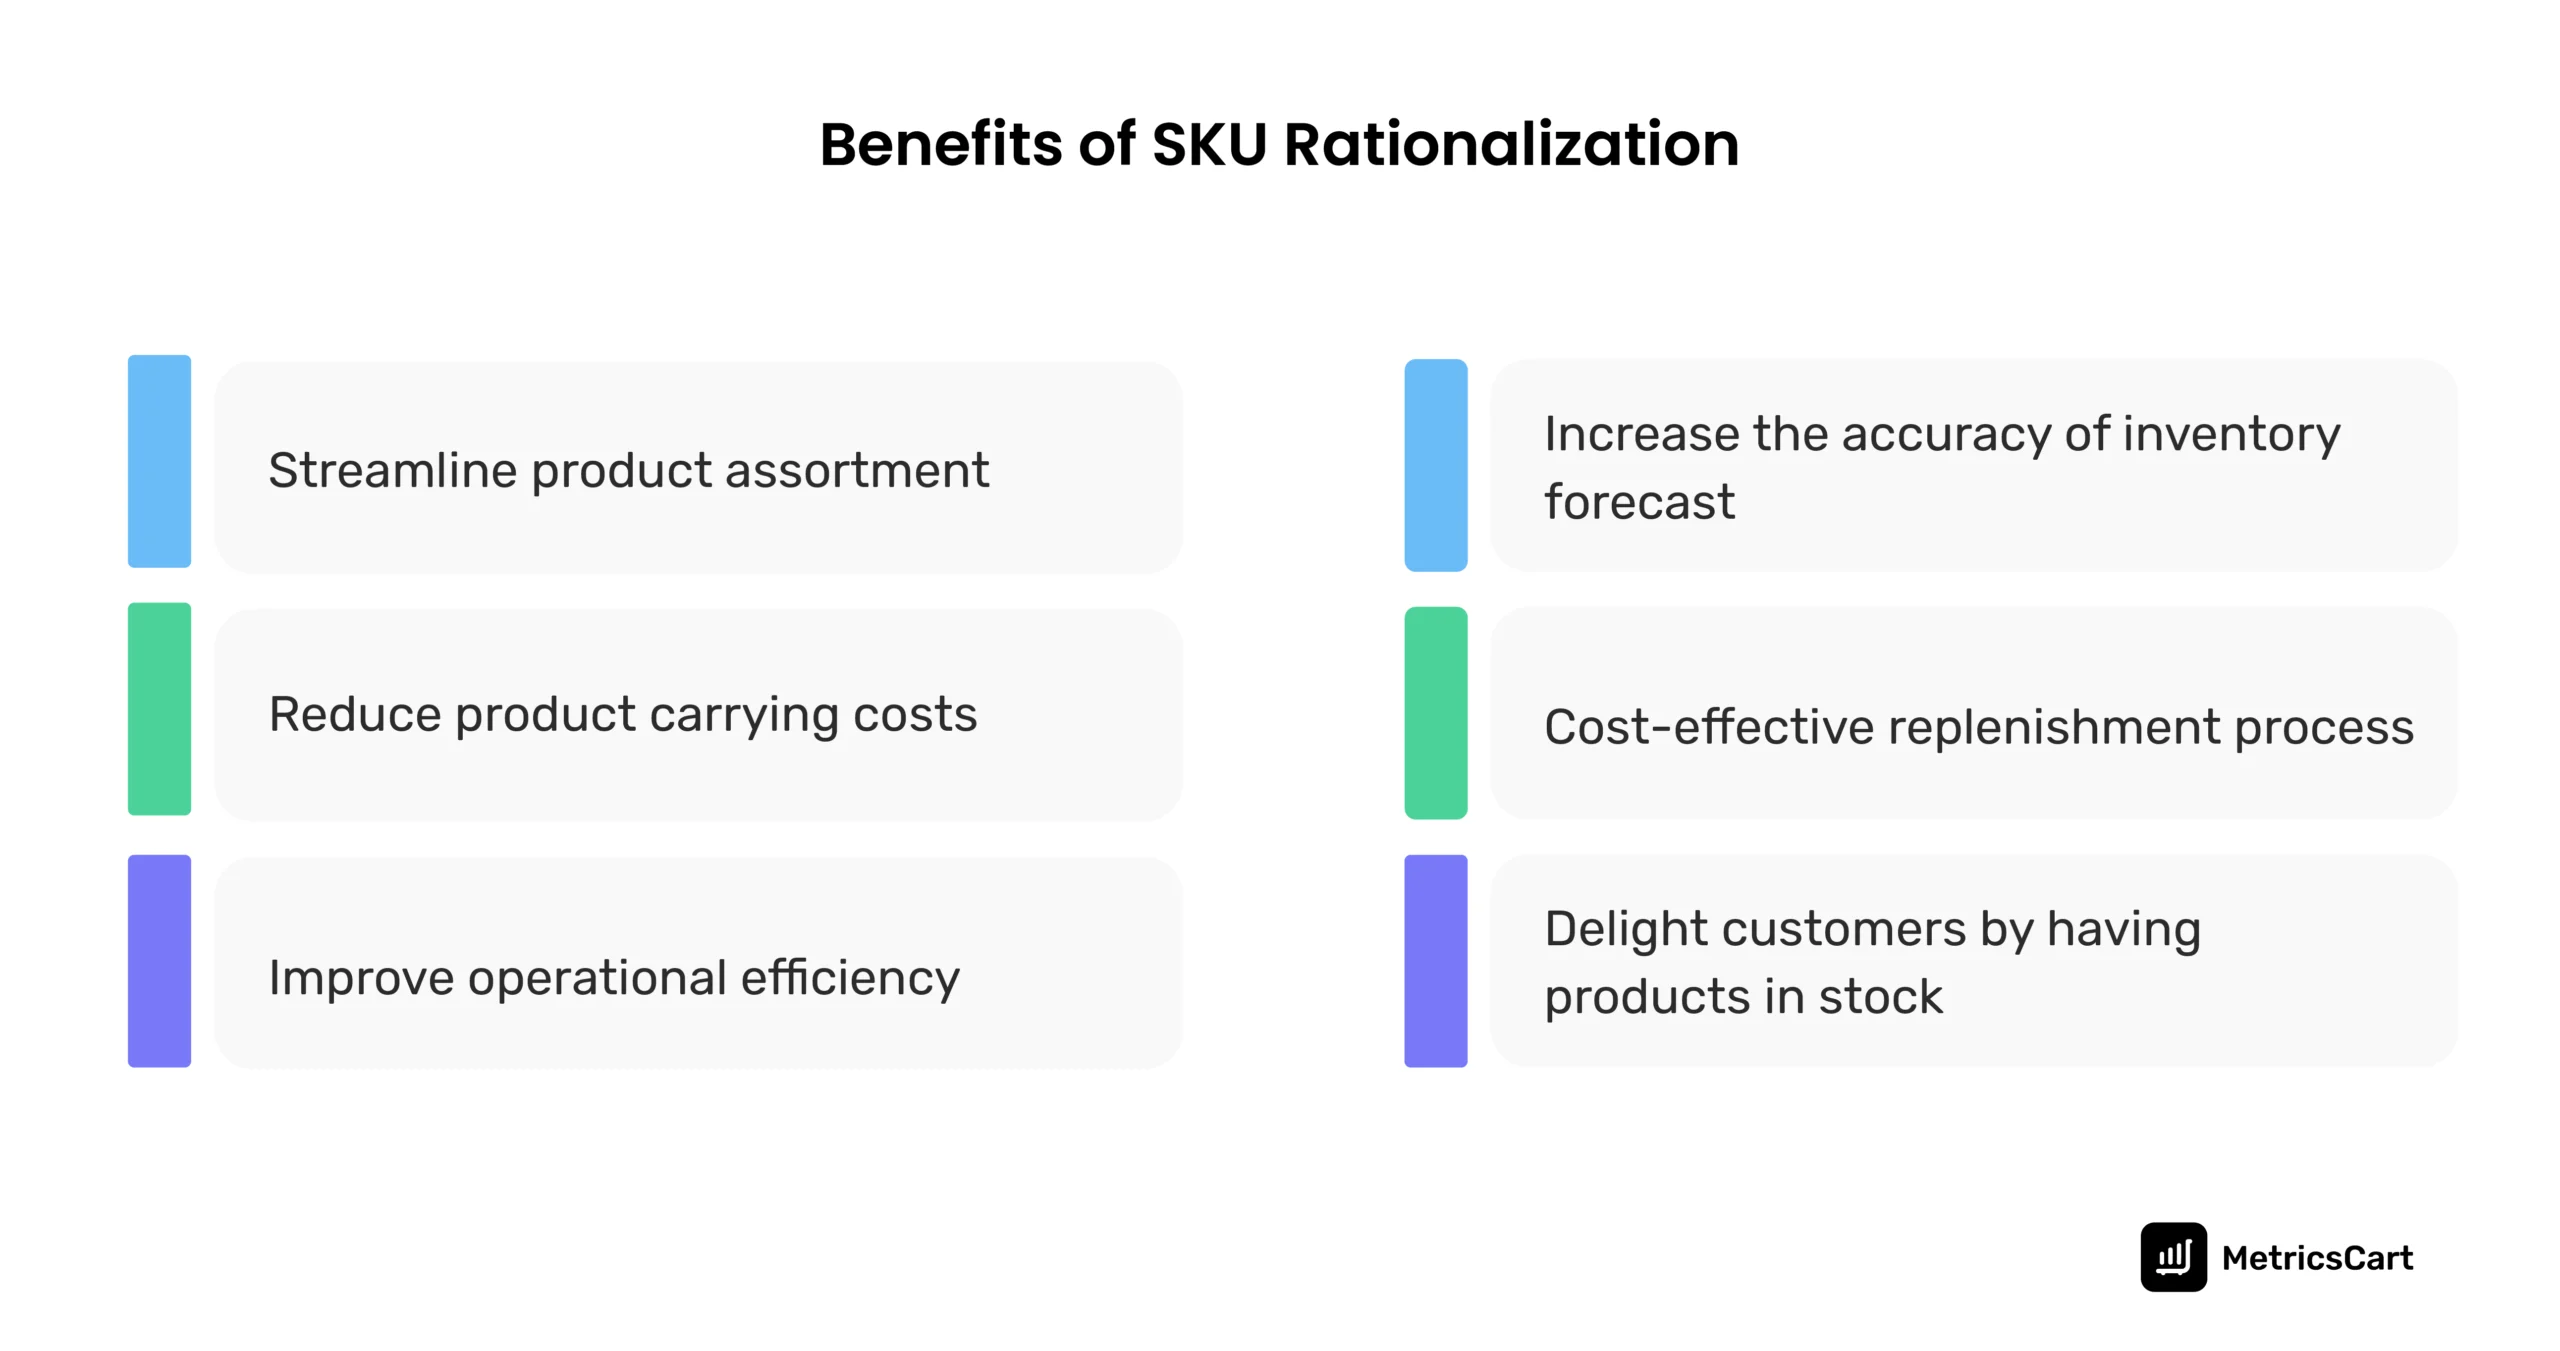 the image shows the benefits of SKU Rationalization